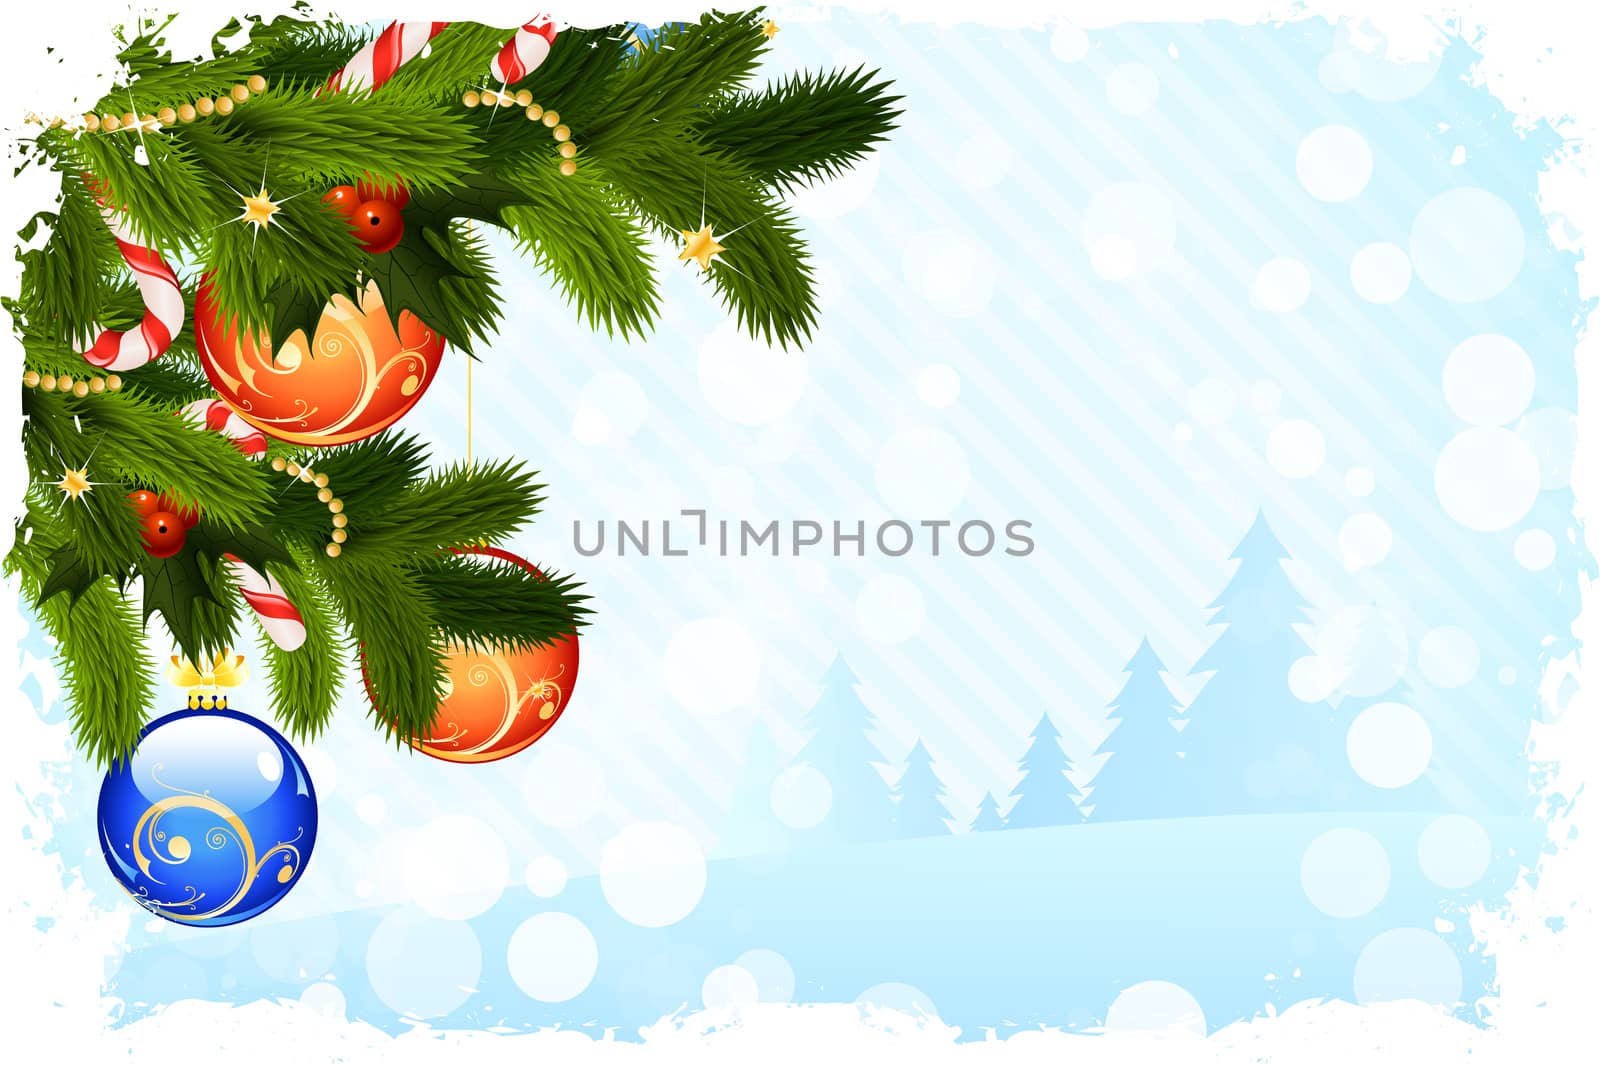 Grungy Christmas Card with Christmas Tree and Decorations